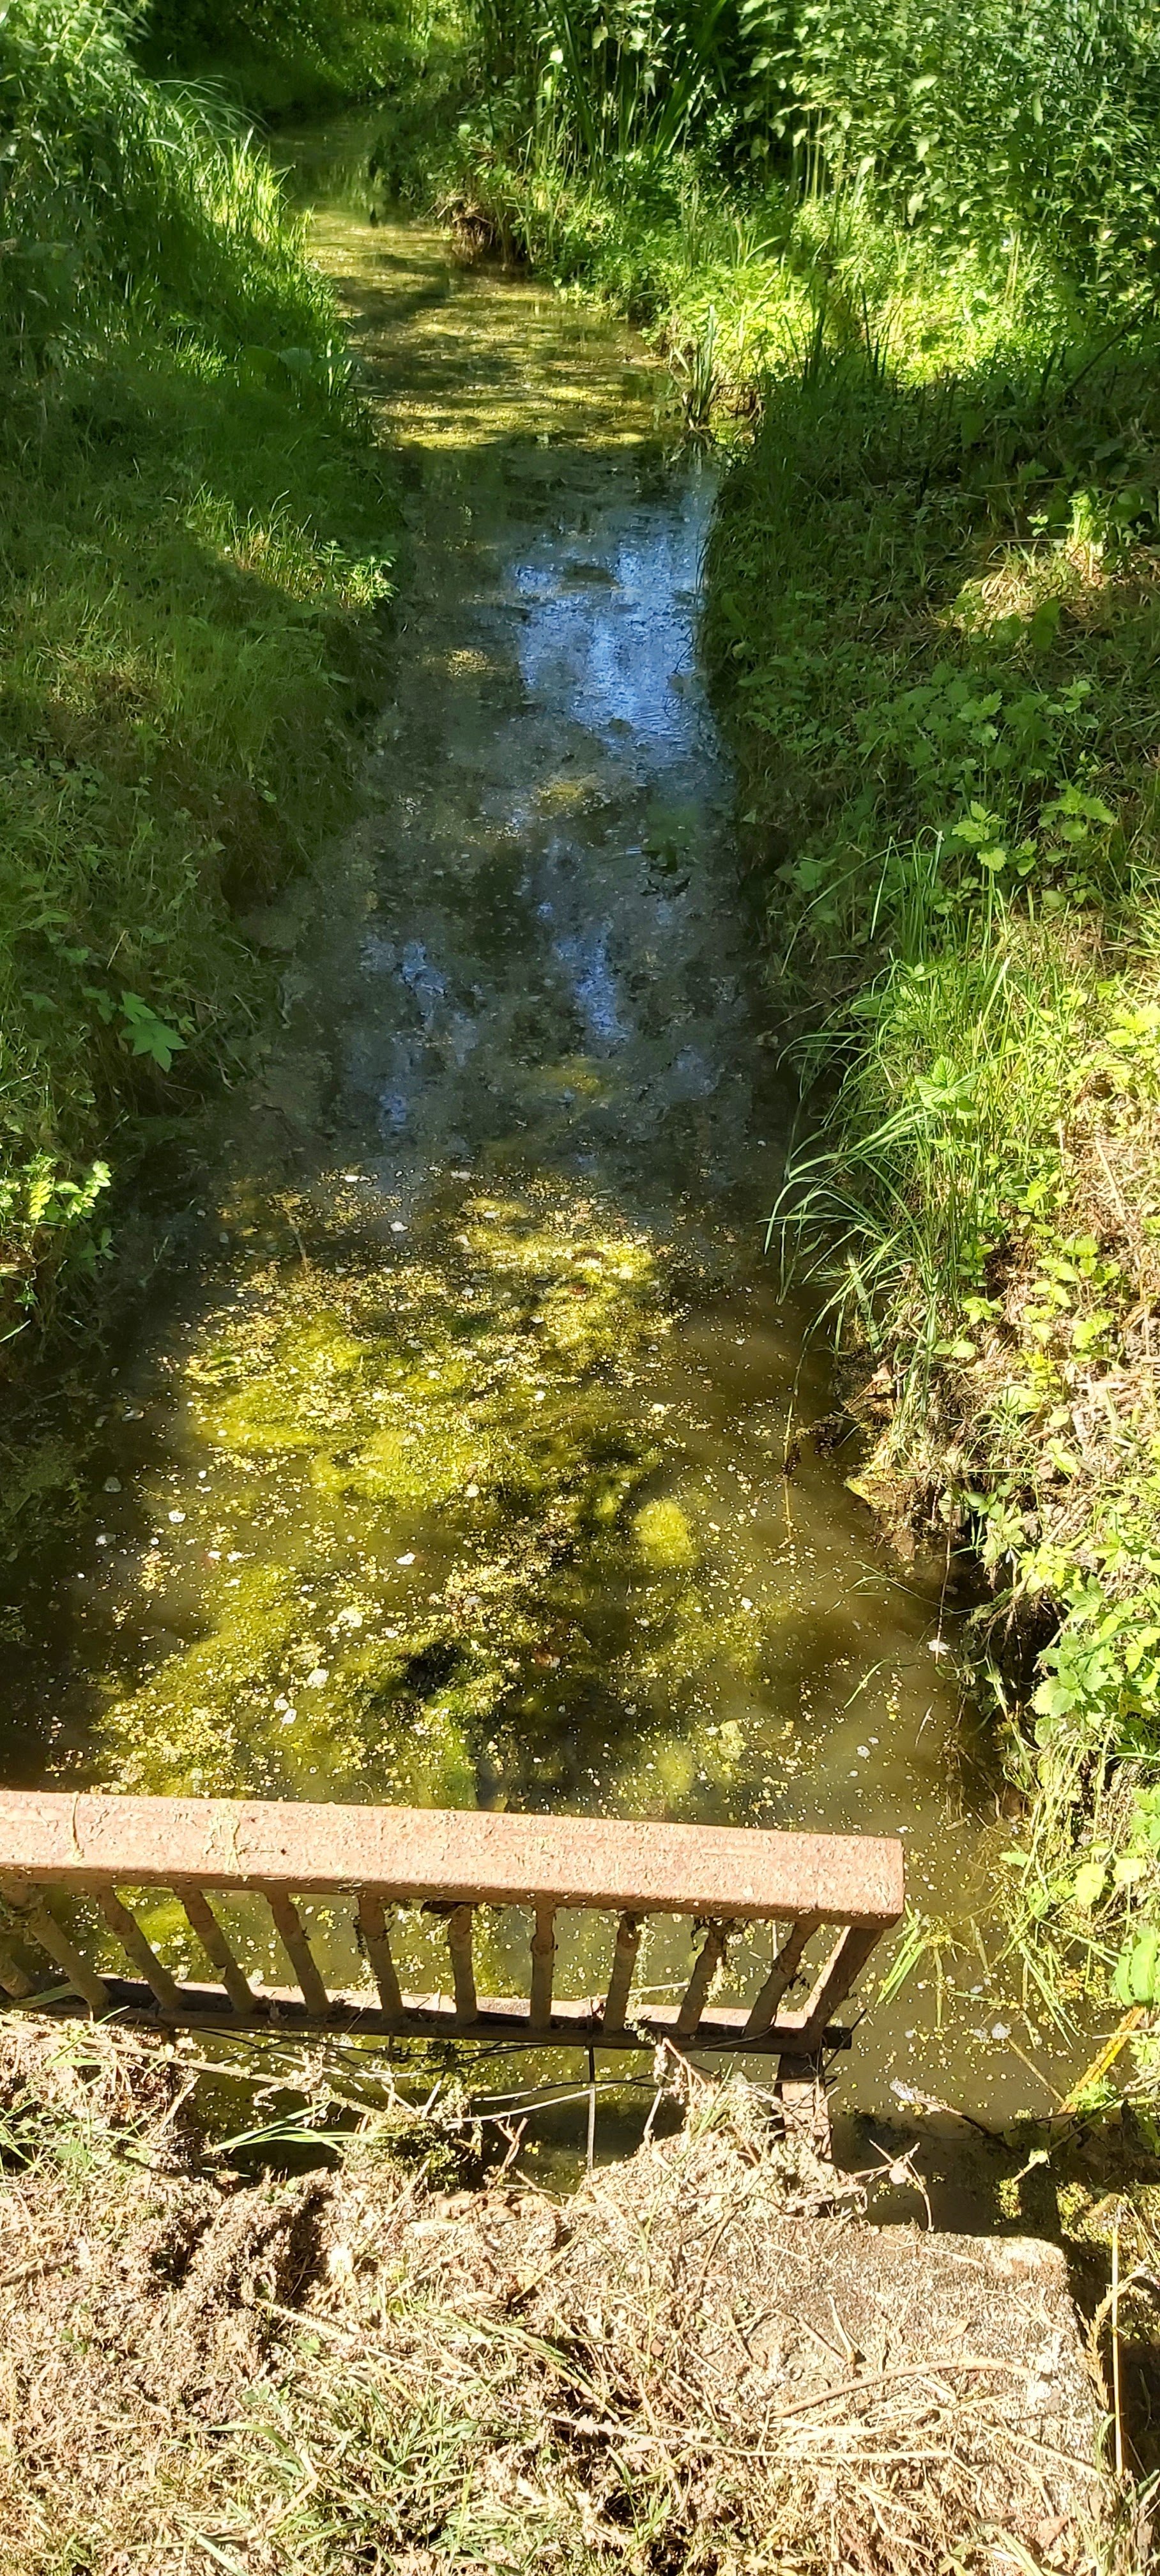 Weed going down outlet stream